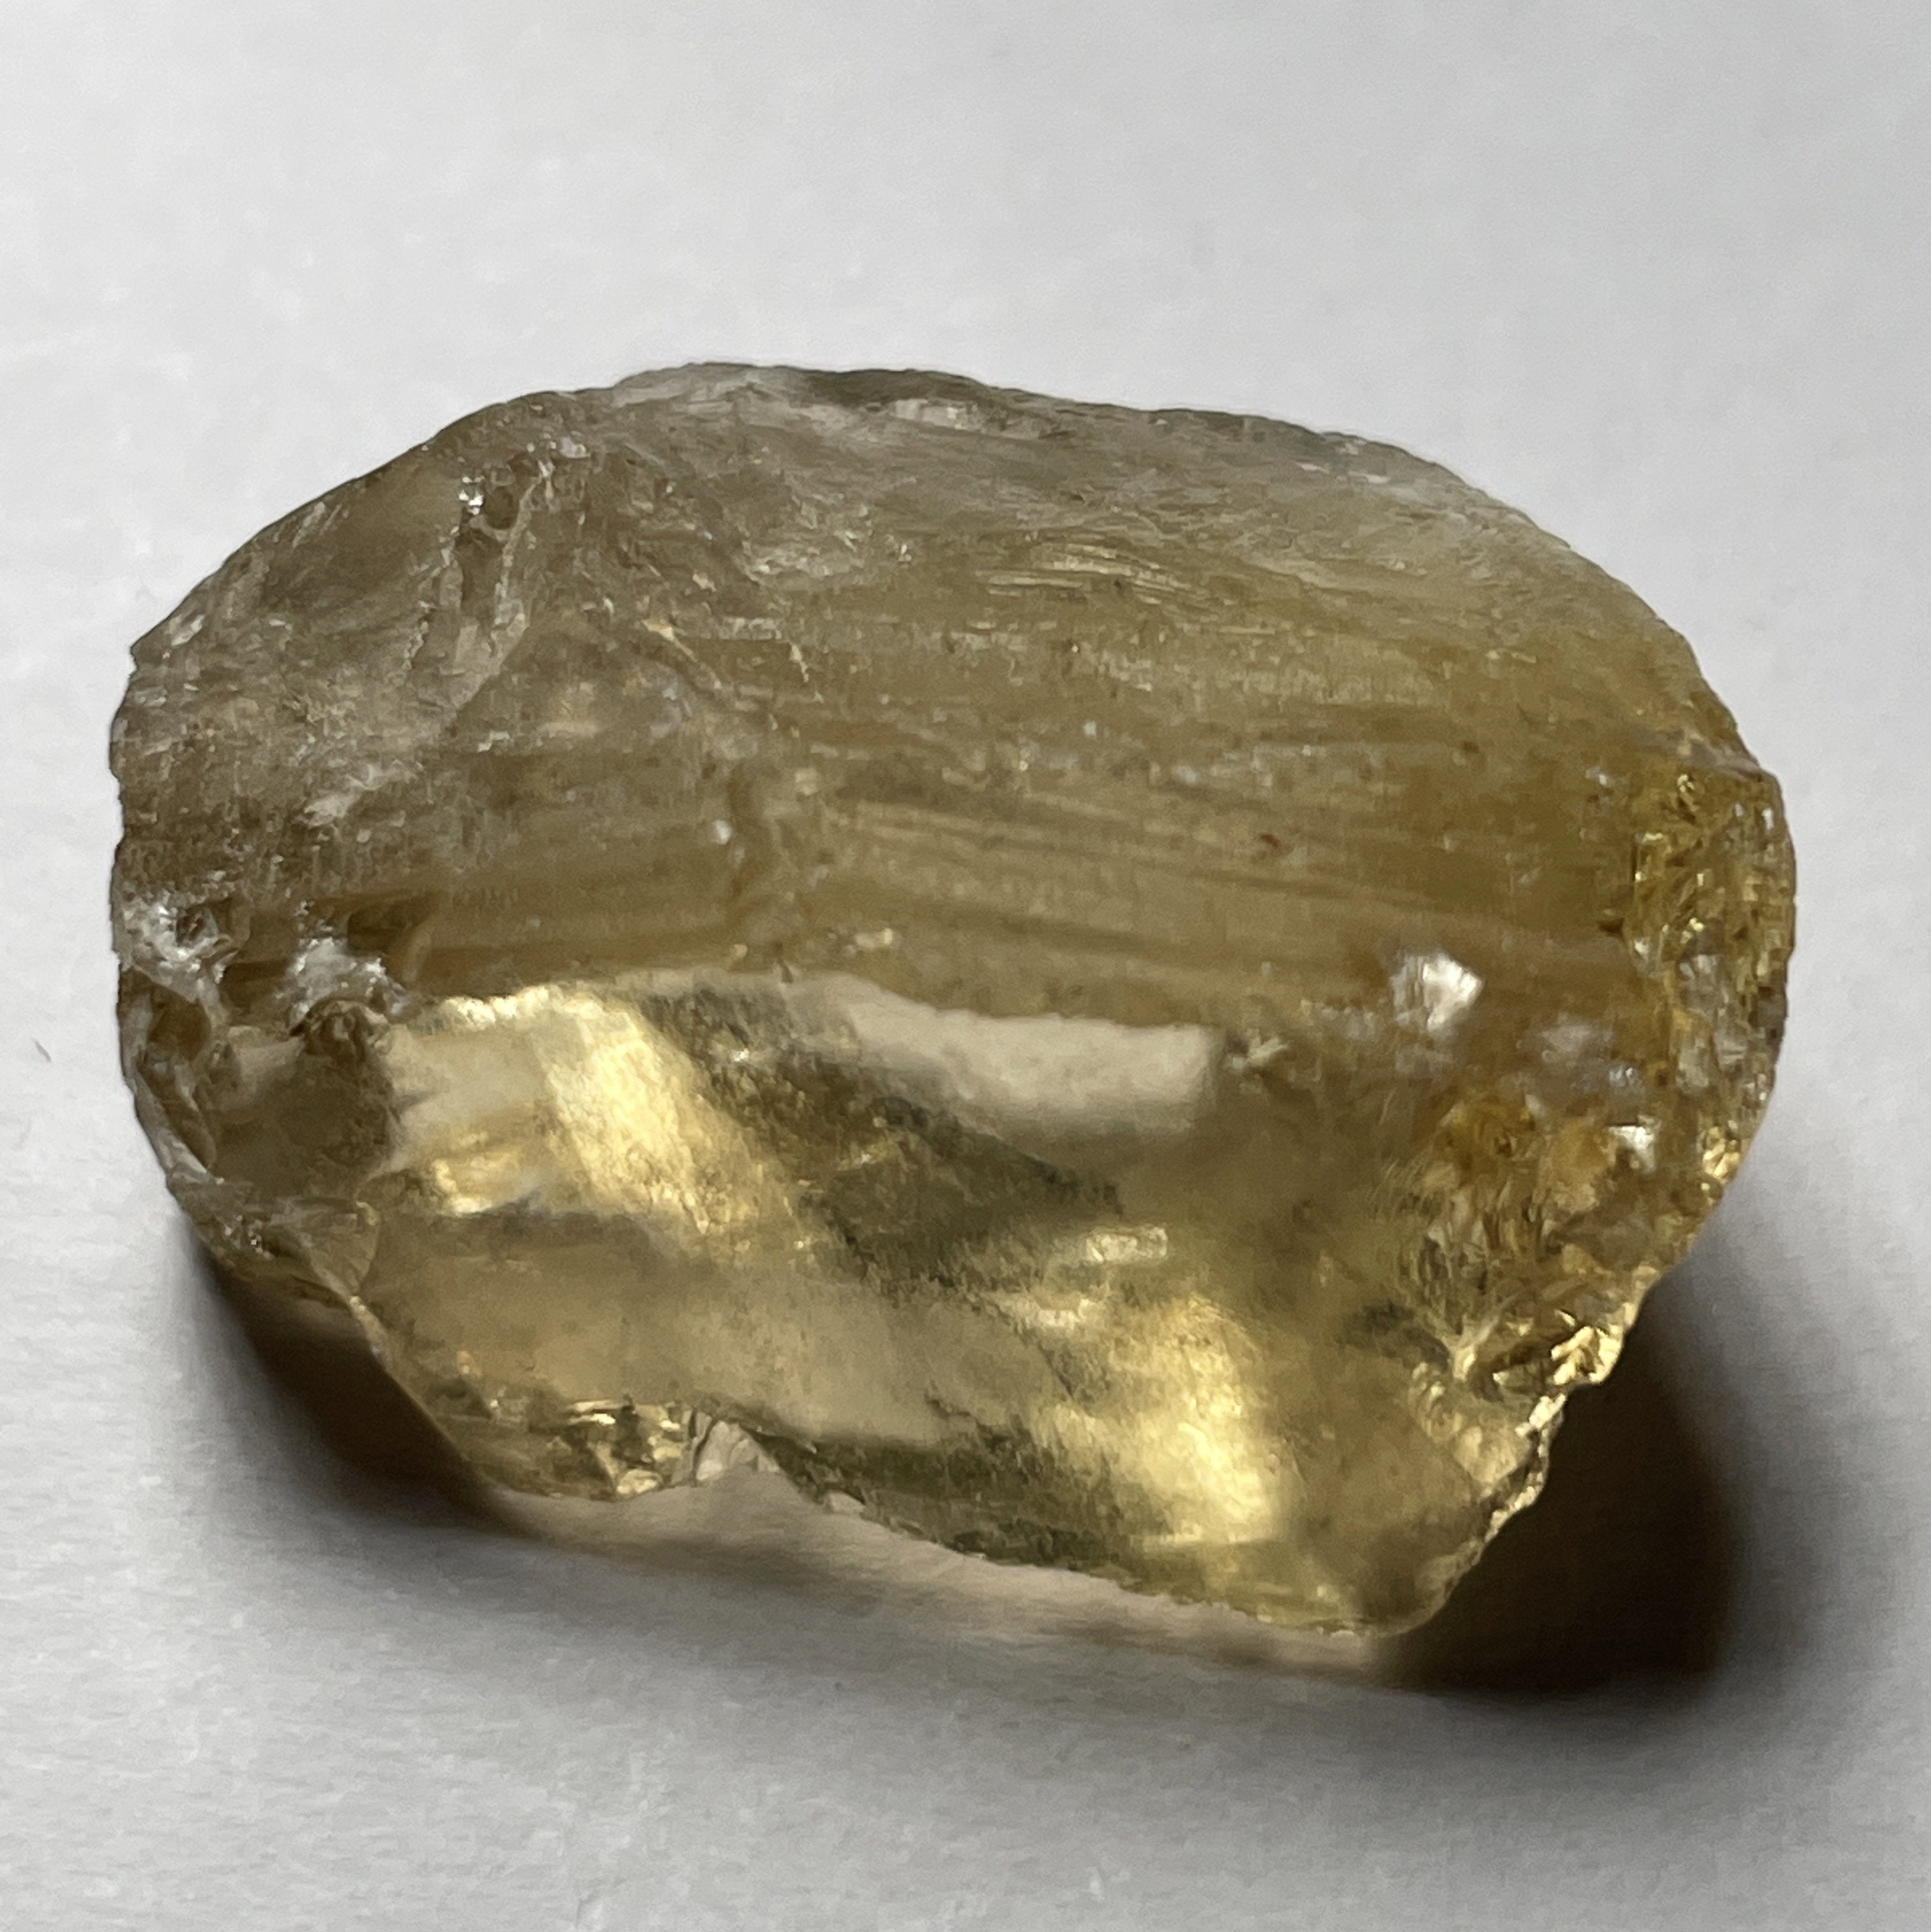 9.49Gm Citrine Zambia. Untreated Unheated. Rare As Not Heated From Amethyst Natural Colour.